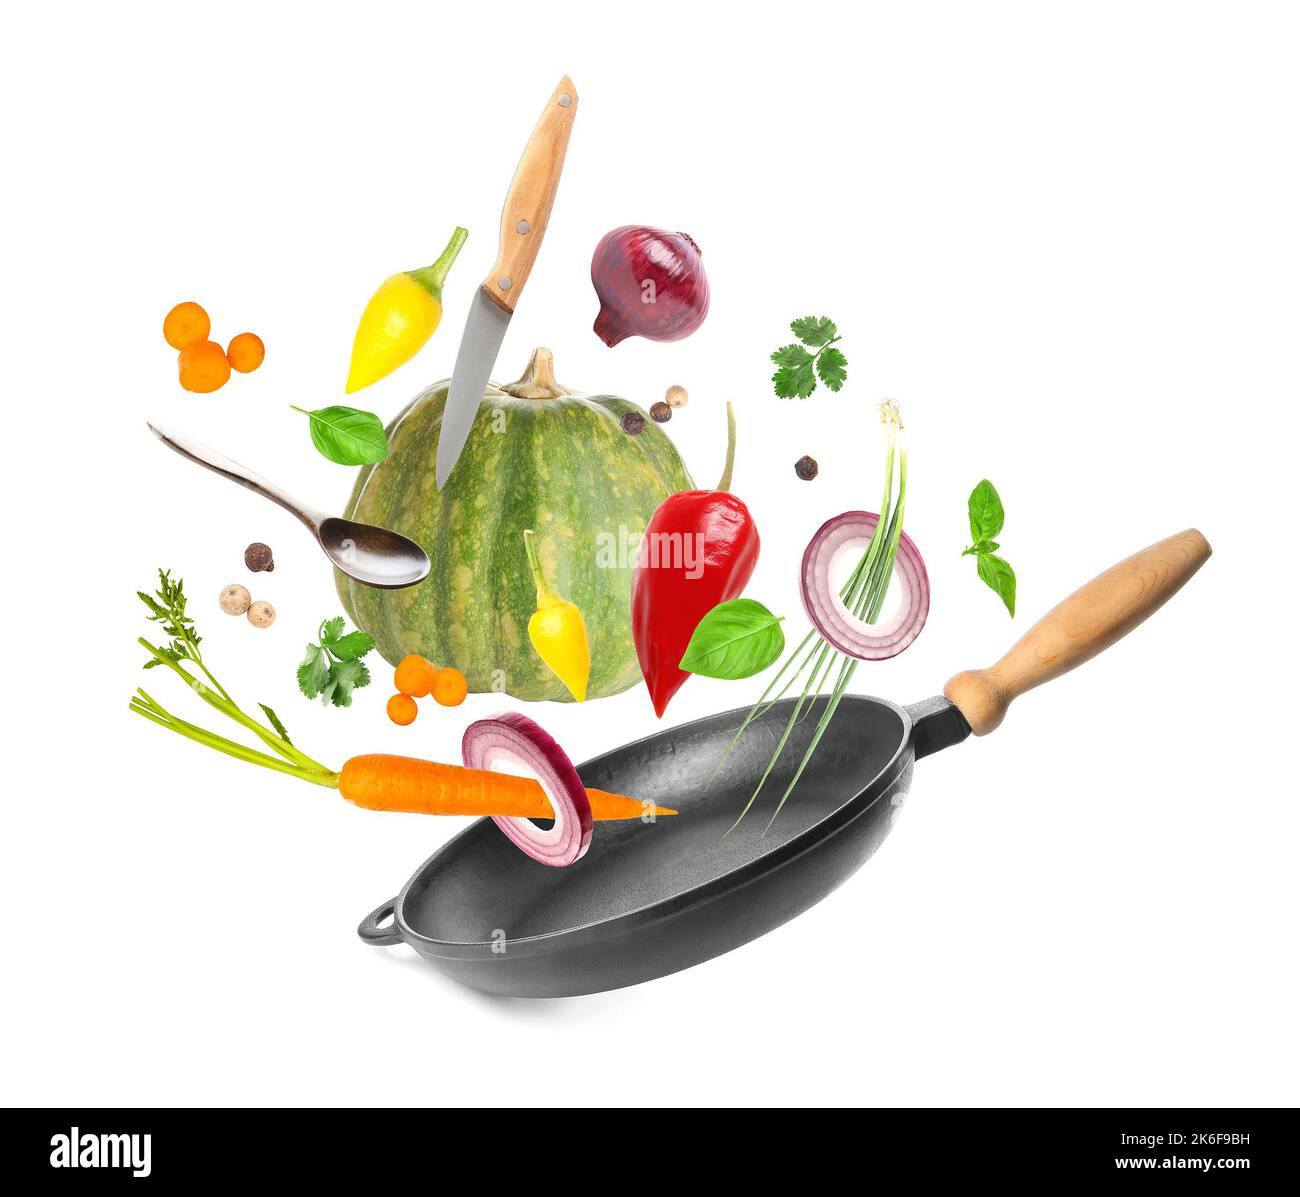 https://c8.alamy.com/comp/2K6F9BH/flying-fresh-vegetables-with-utensils-and-frying-pan-on-white-background-2K6F9BH.jpg